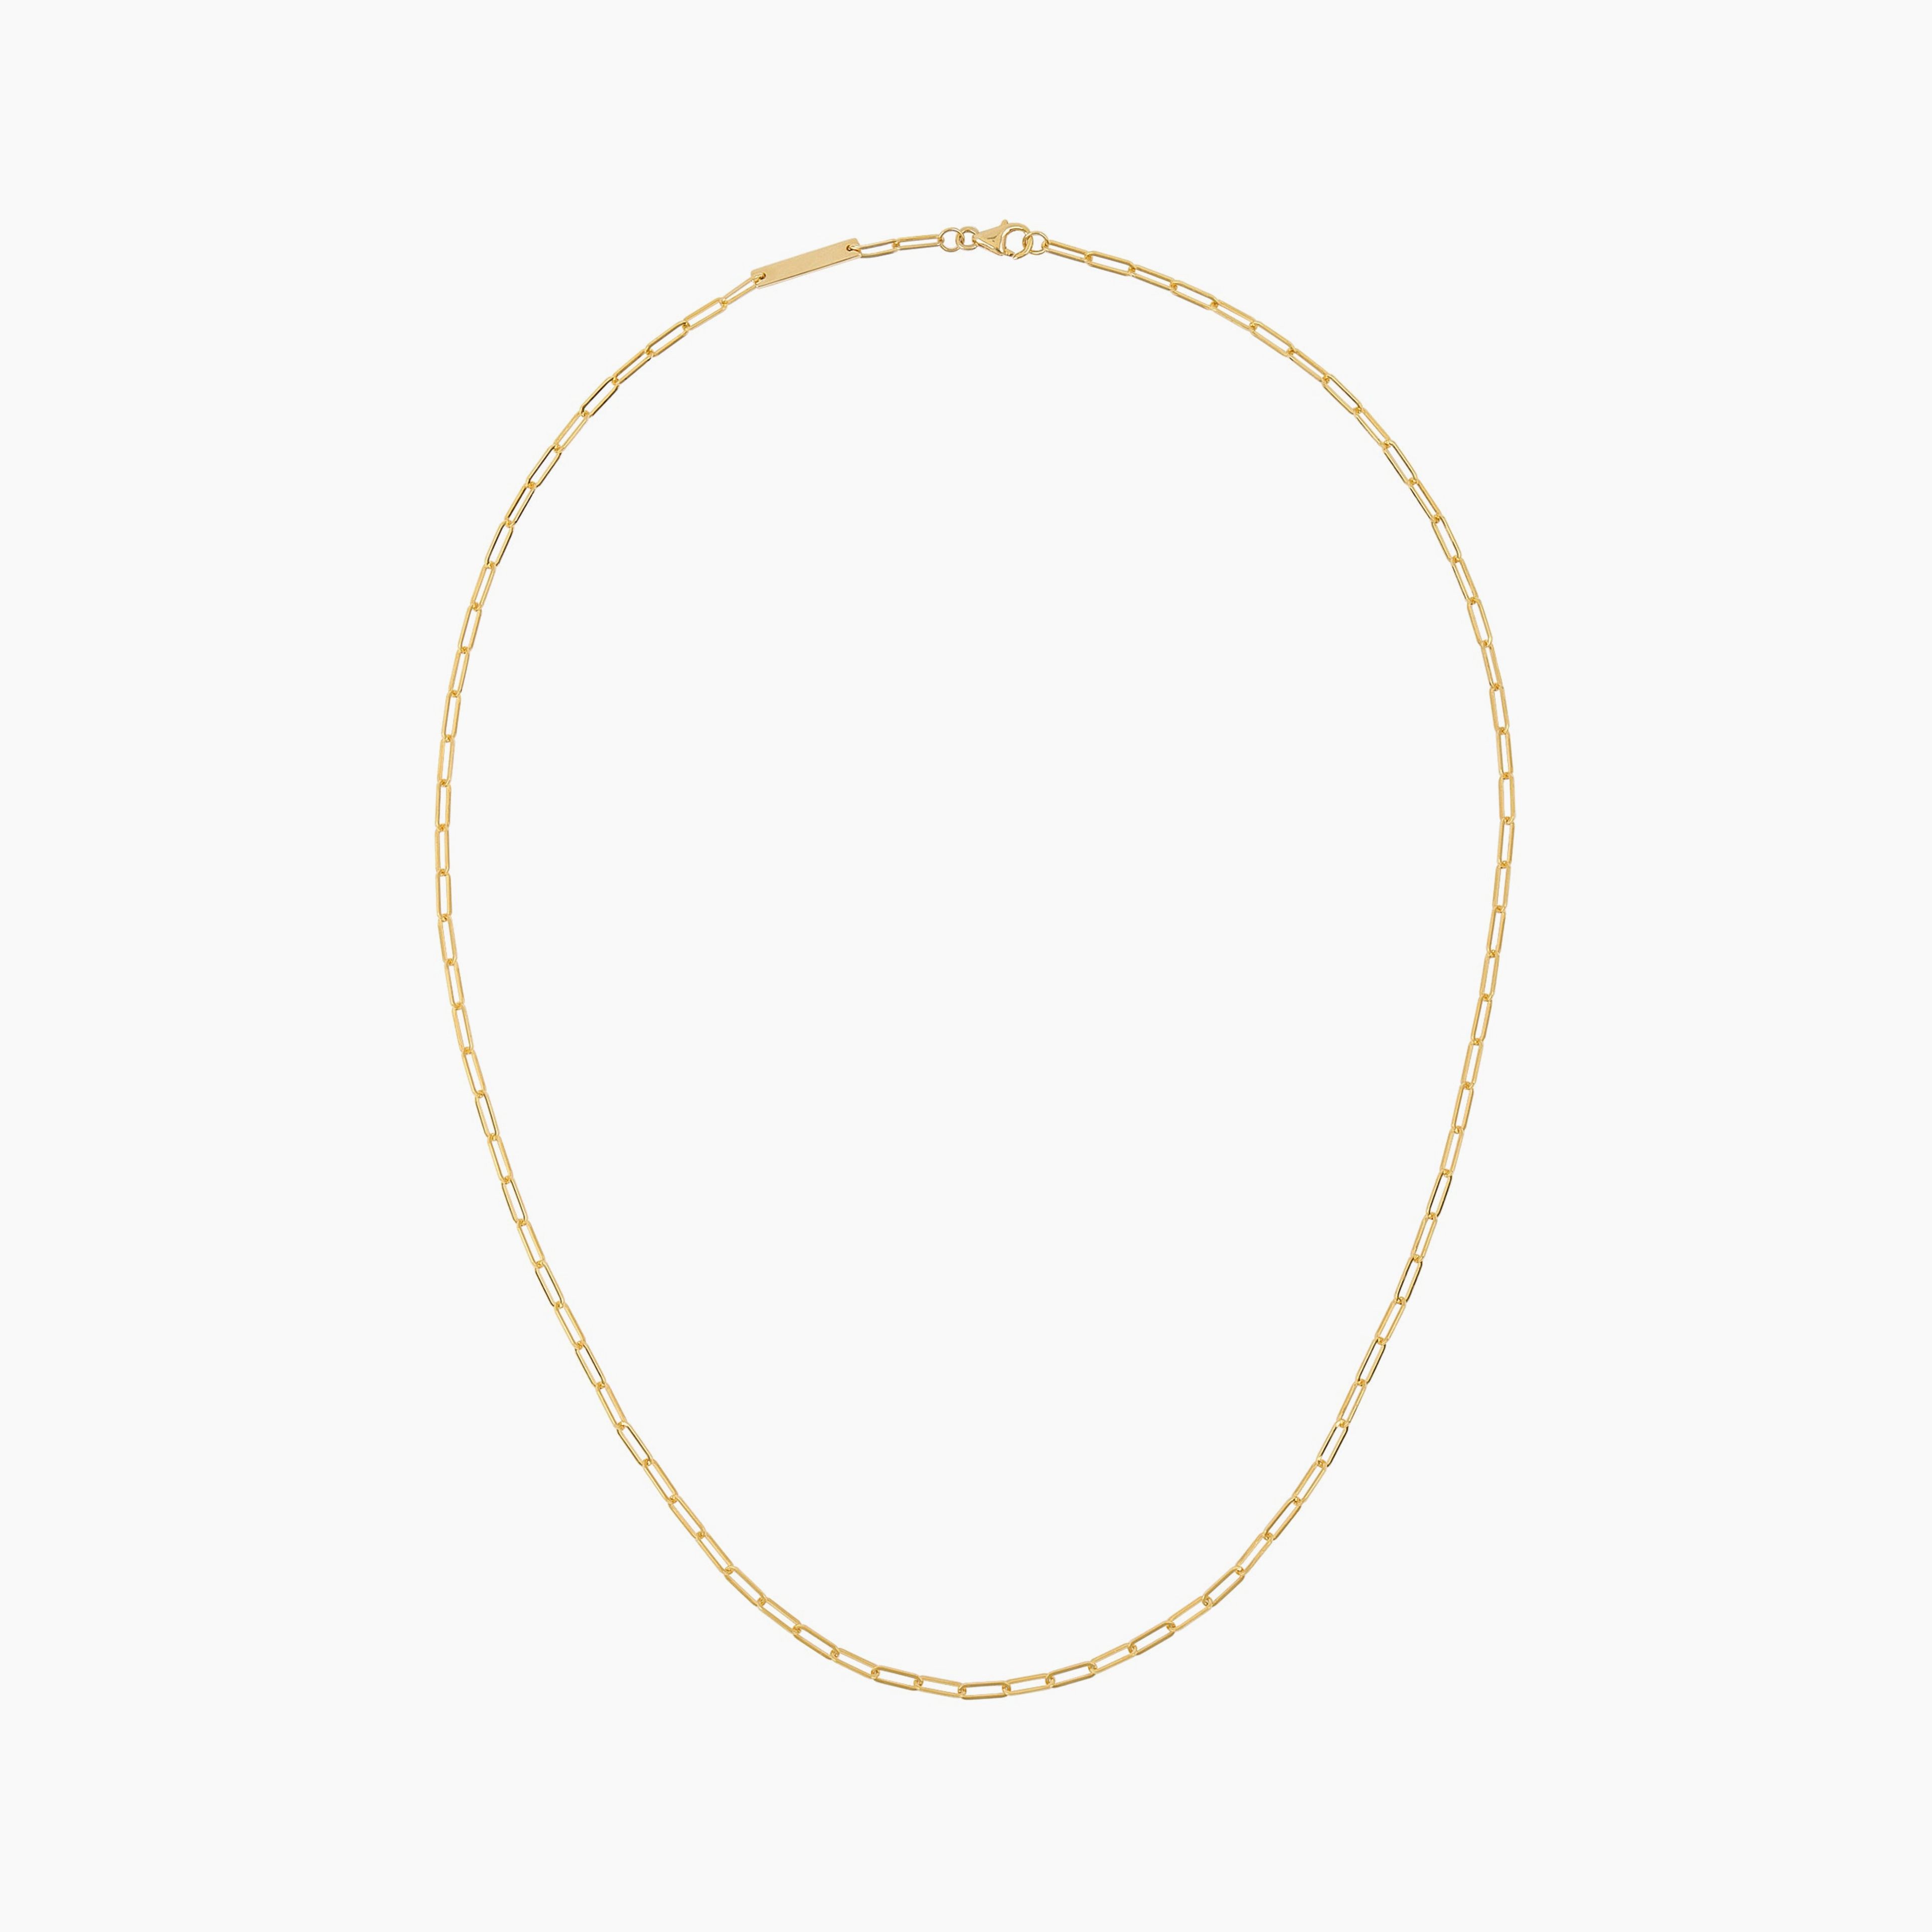 Staple Chain Necklace